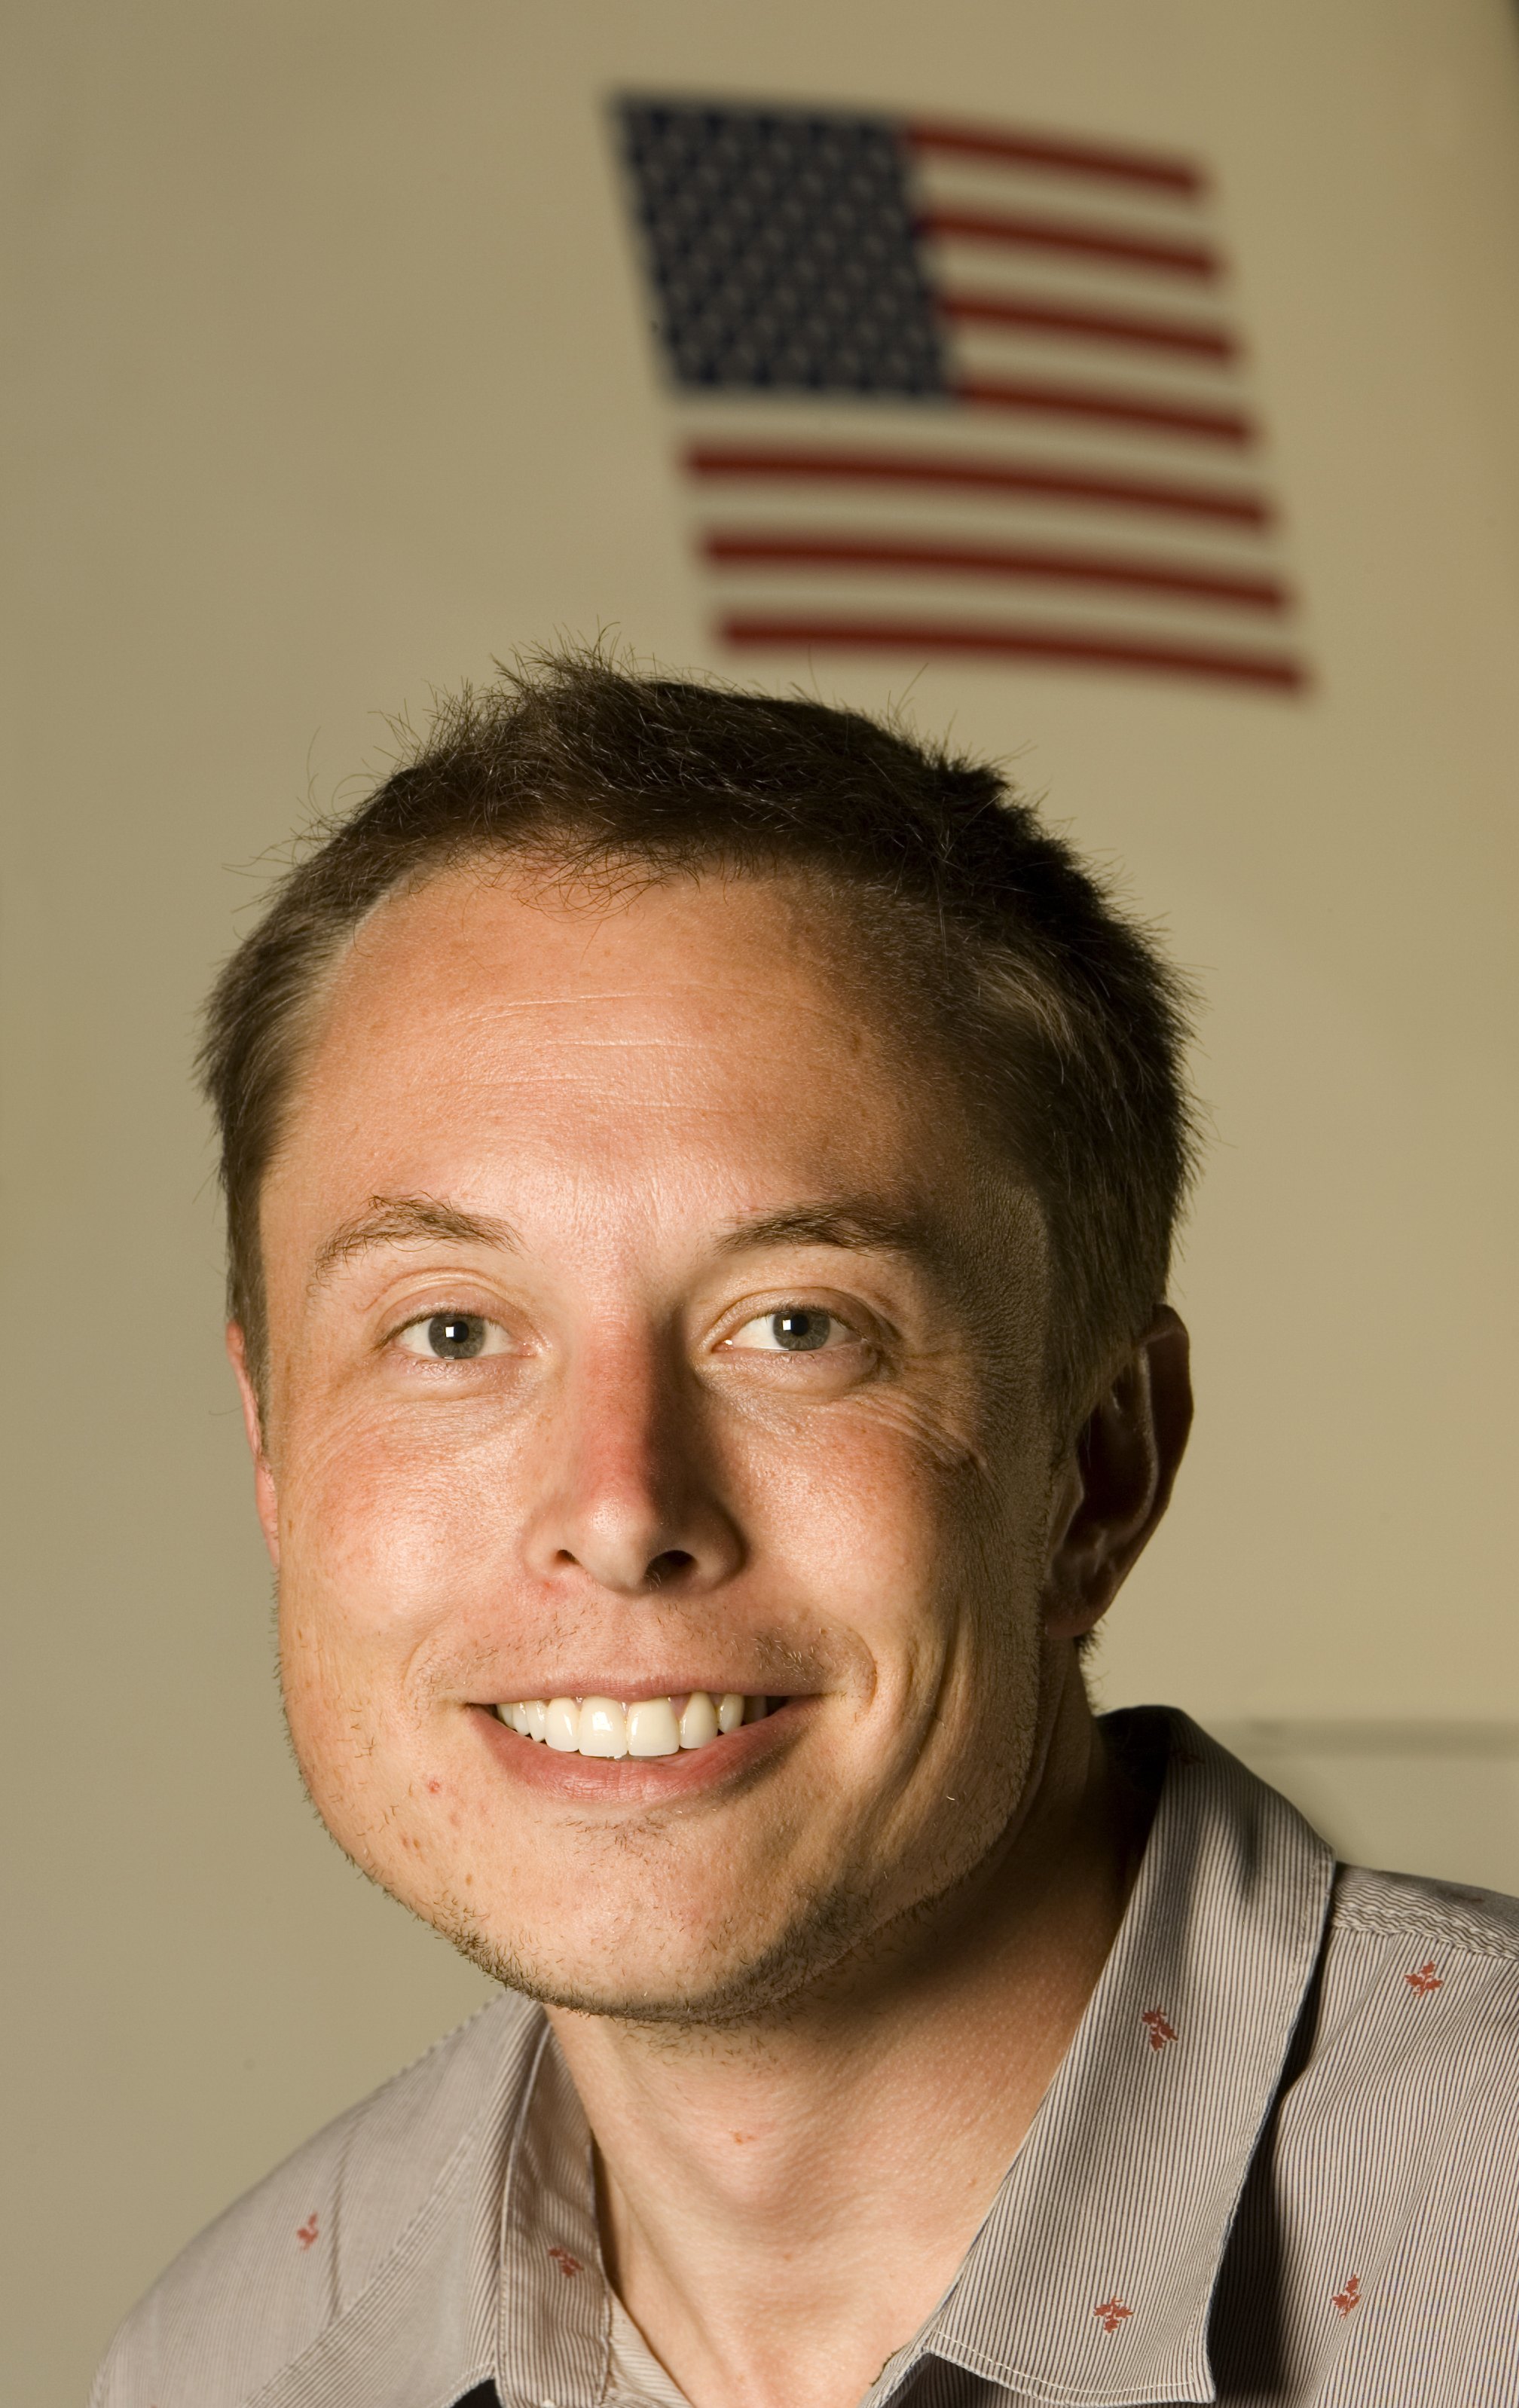 A portrait of Elon Musk on on July 25, 2008, in Los Angeles, California. | Source: Getty Images